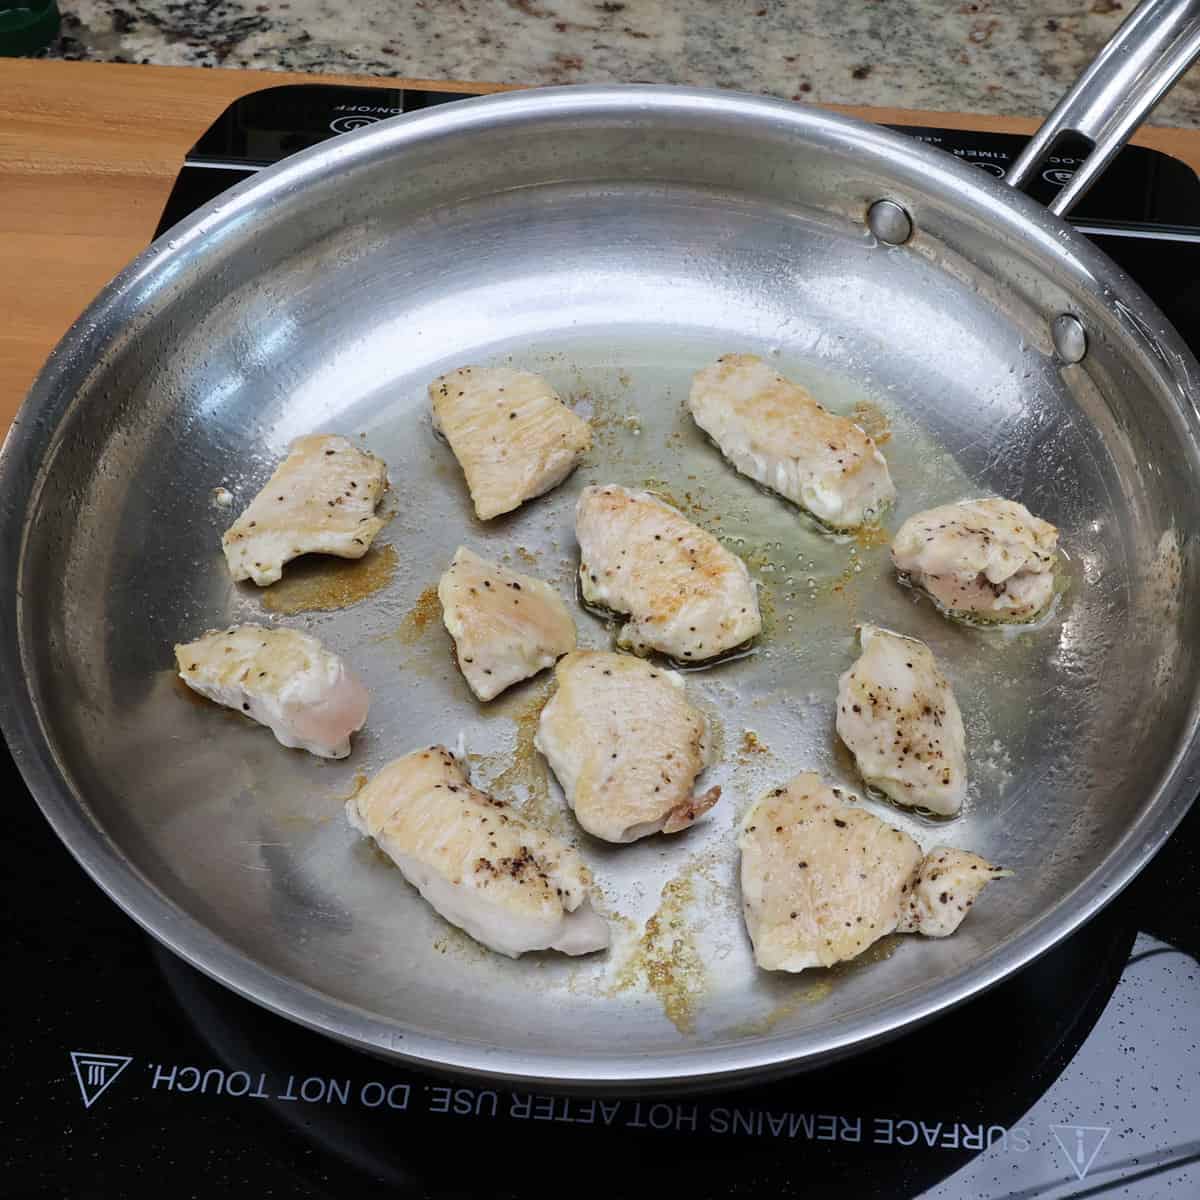 chicken pieces cooking in a skillet.